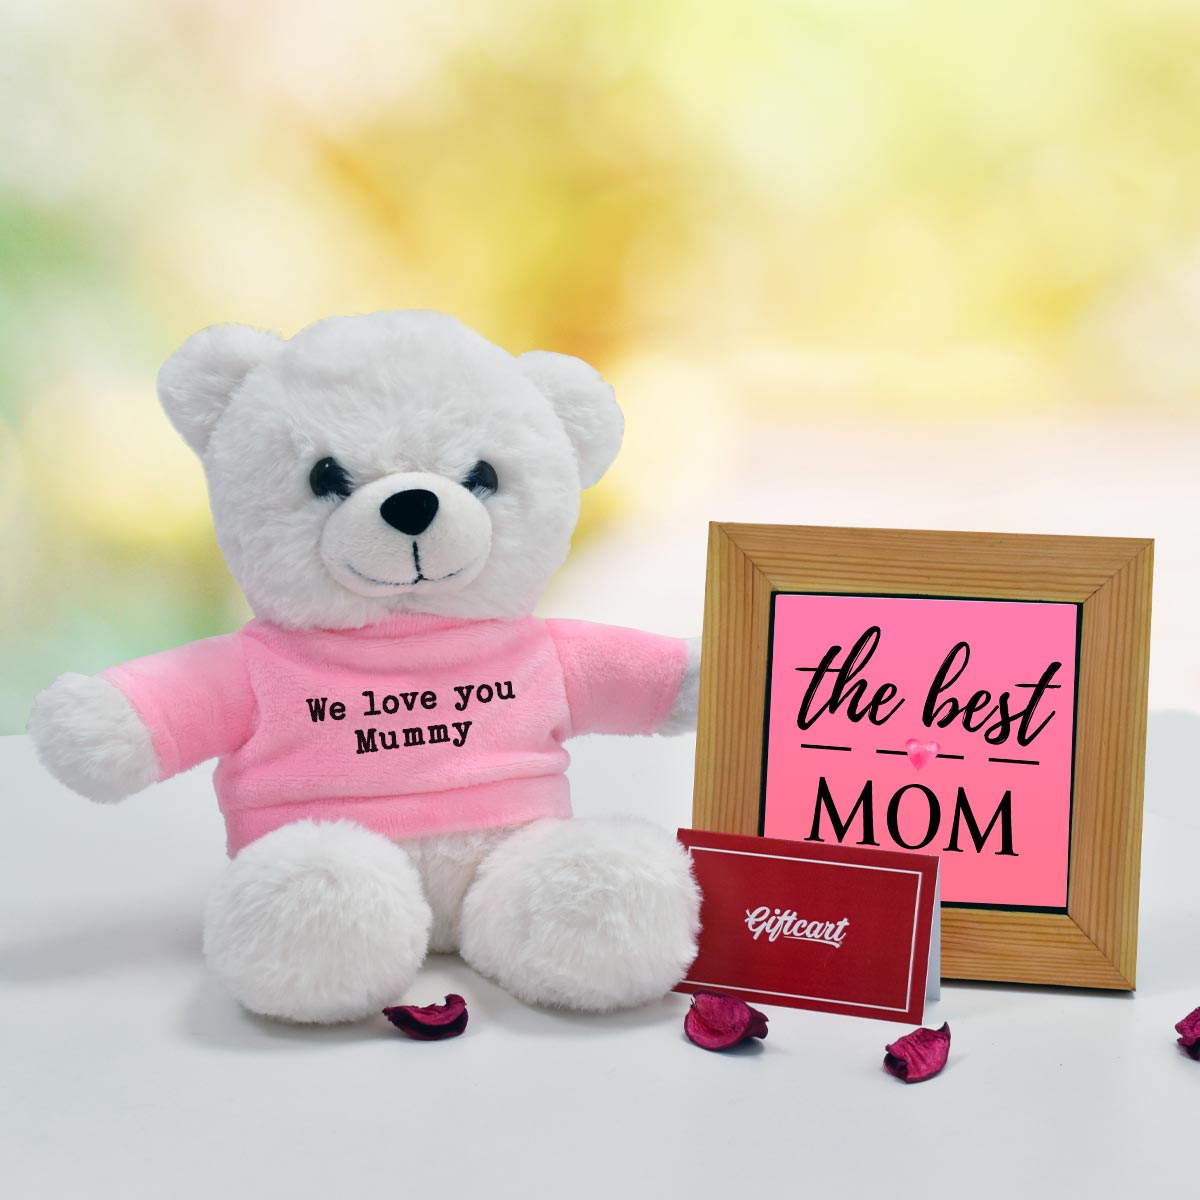 We Love you Mommy Teddy and Table Top with Greeting Card Hamper-6